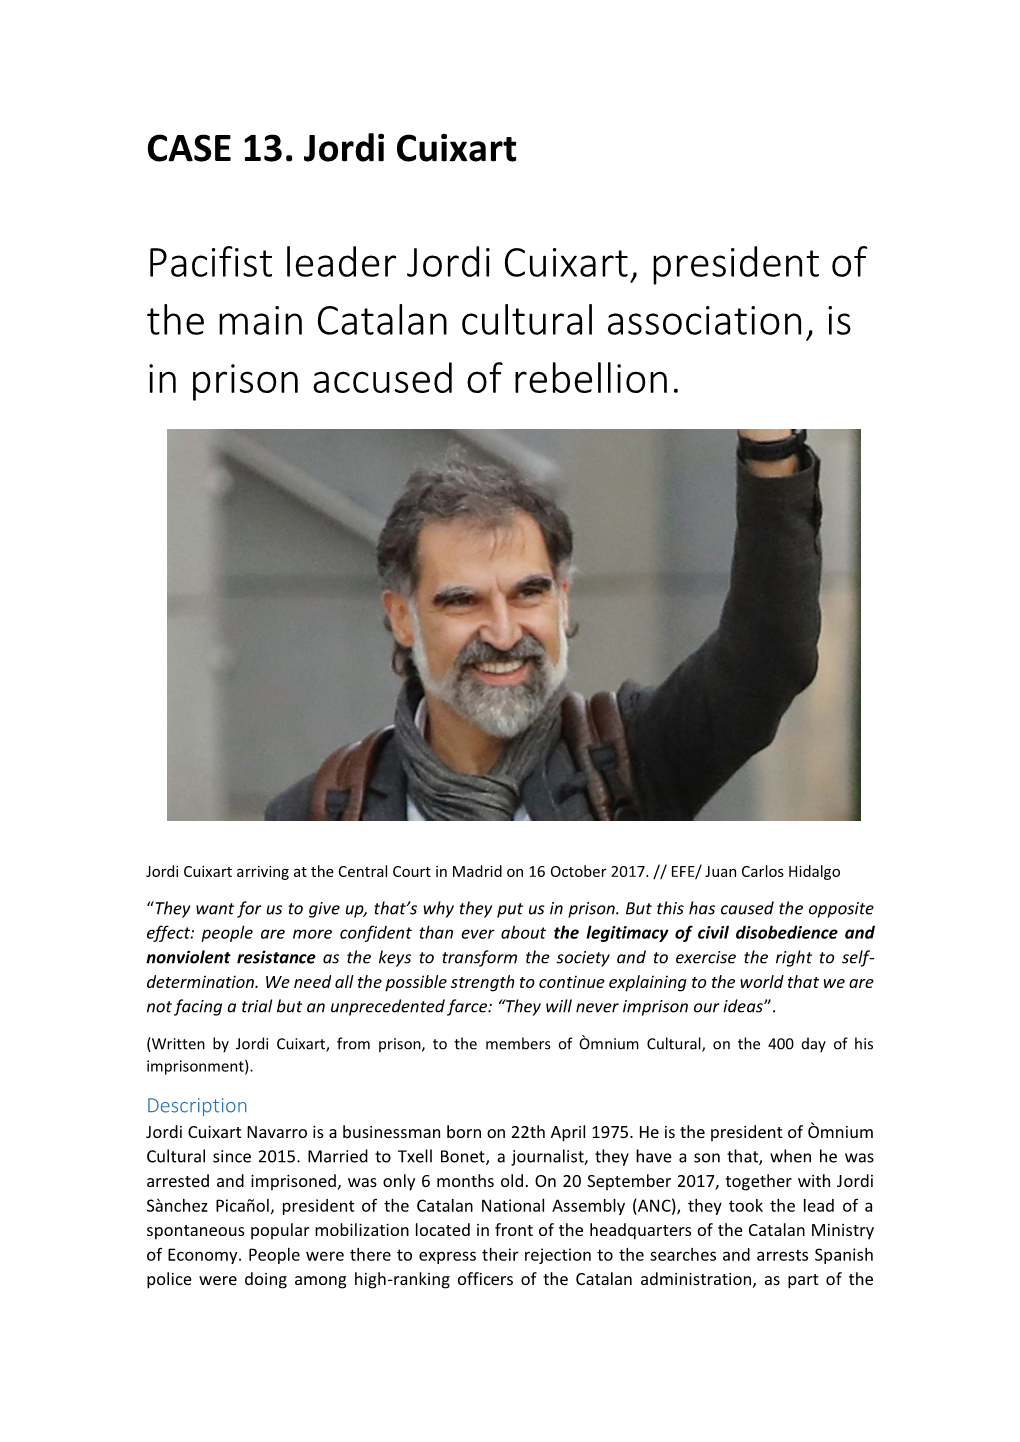 Pacifist Leader Jordi Cuixart, President of the Main Catalan Cultural Association, Is in Prison Accused of Rebellion